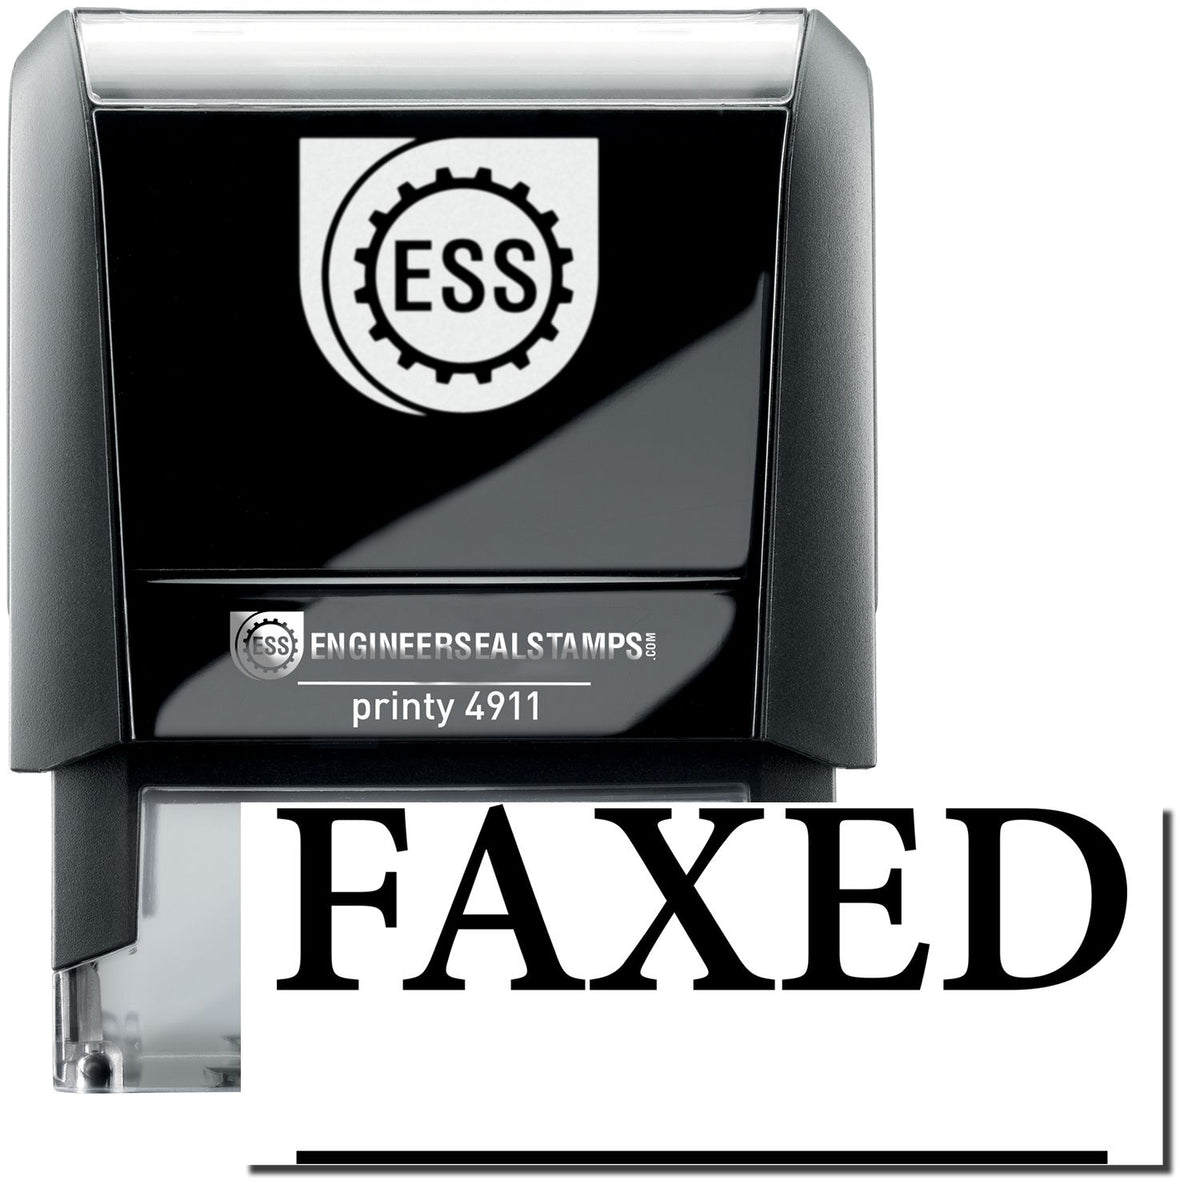 A self-inking stamp with a stamped image showing how the text &quot;FAXED&quot; in a times font with a line under it is displayed after stamping.